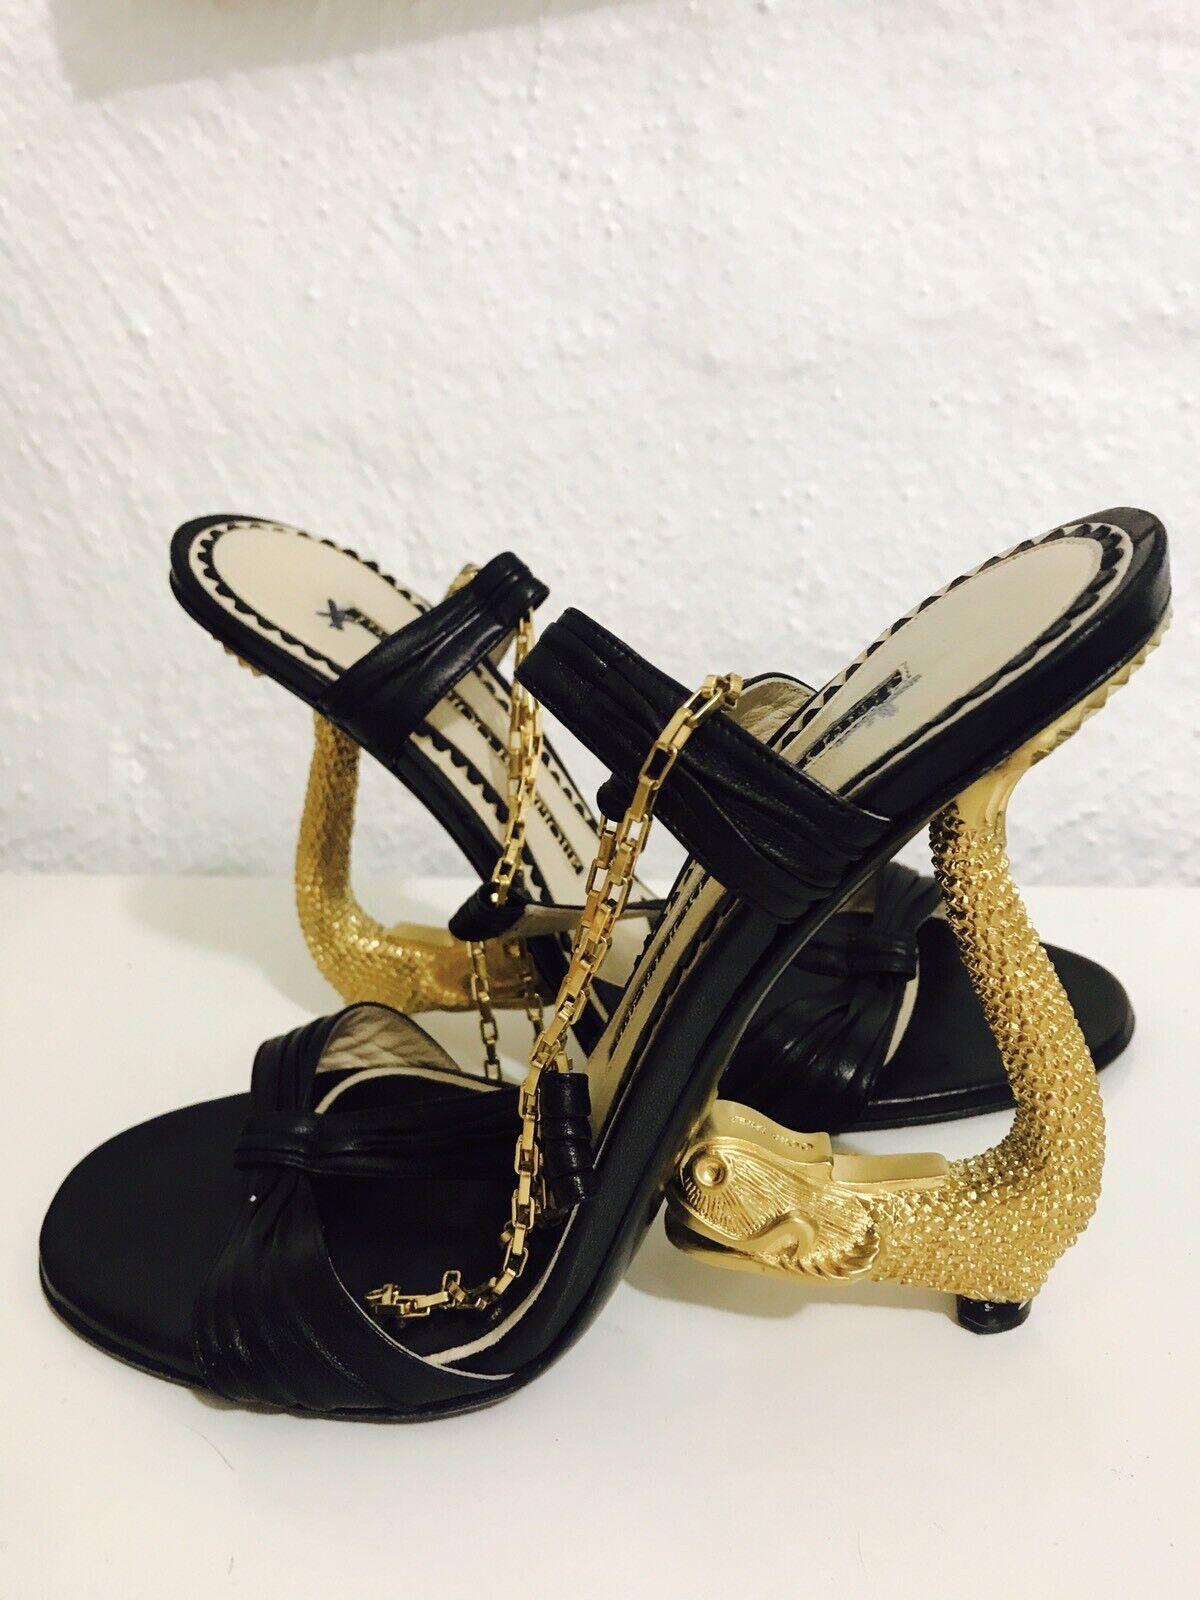 Extremely Rare Jimmy Choo Boutique Gold Dragon Women’s Shoe Heels Sandal Size 40